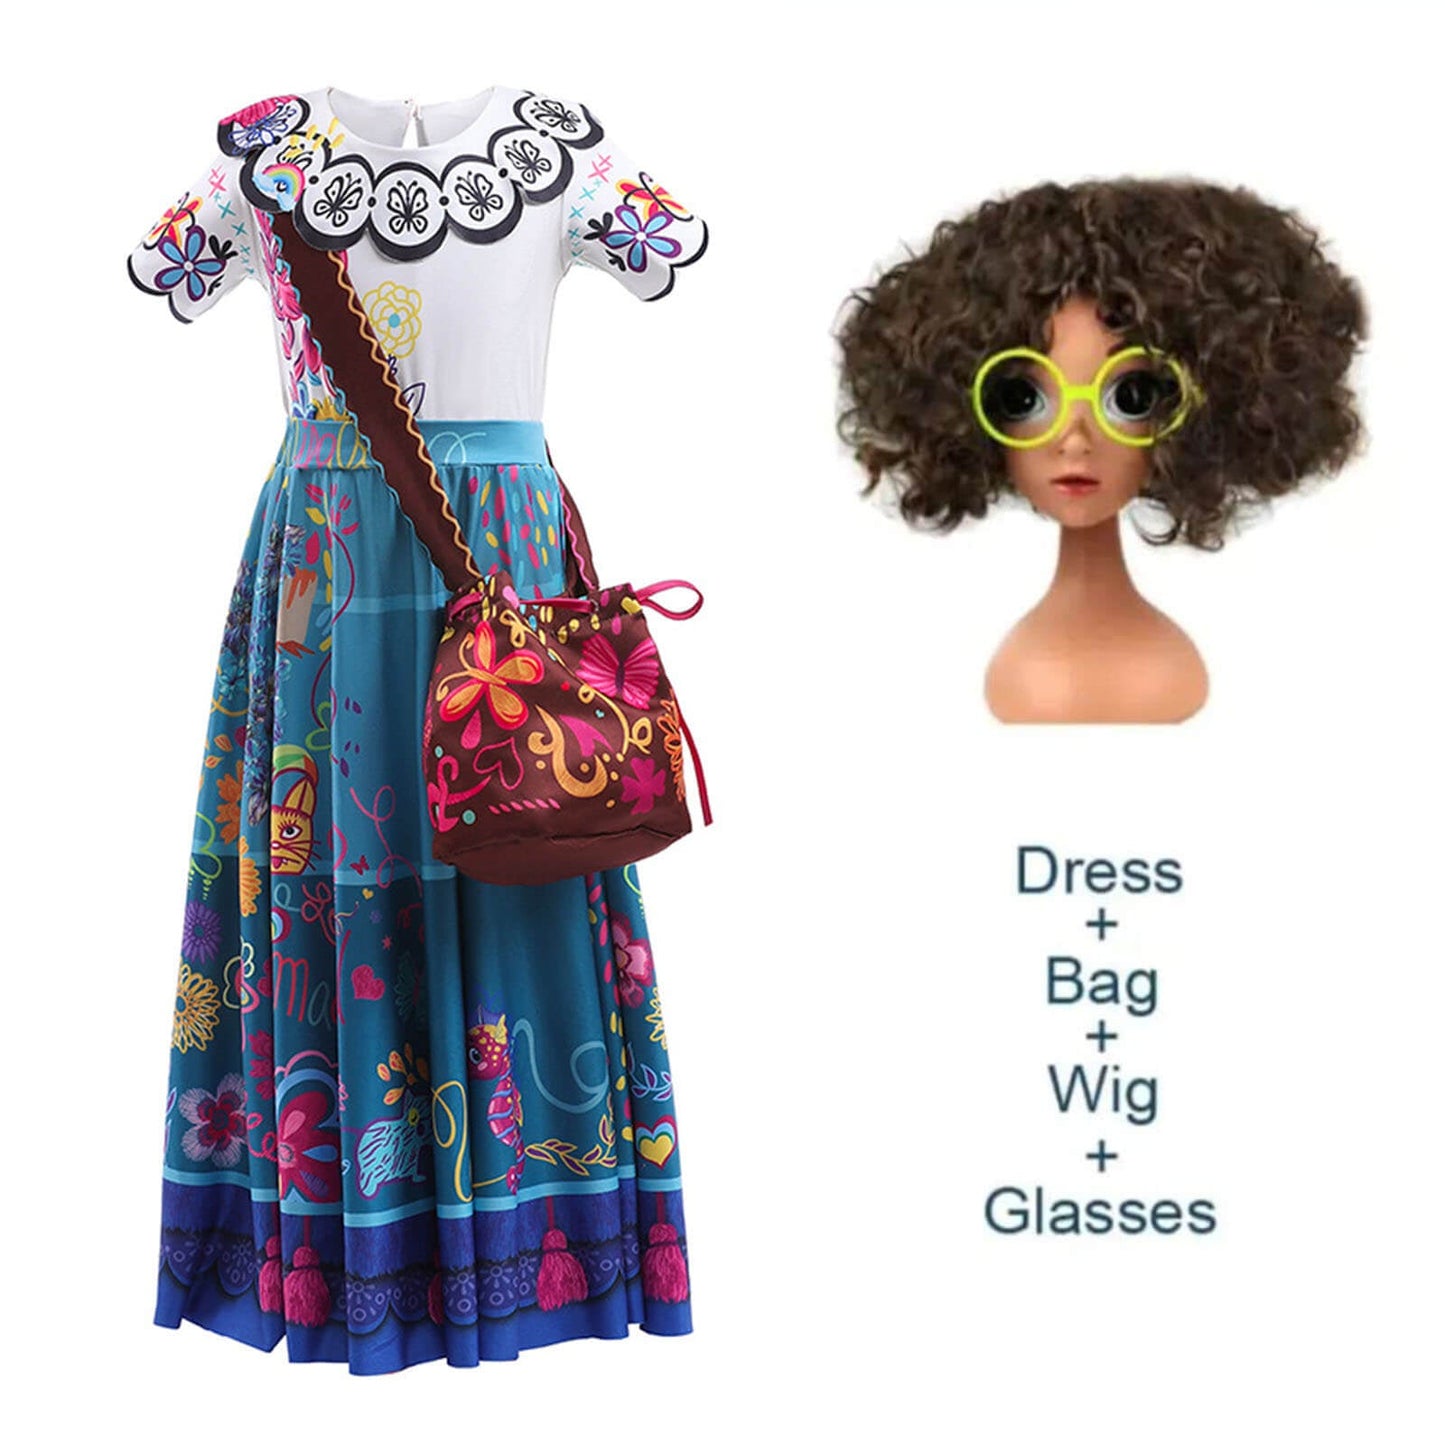 Kids Mirabel Dress with Bag and Wig Glasses Mirabel Mardrigal Party Carnival Halloween Costume